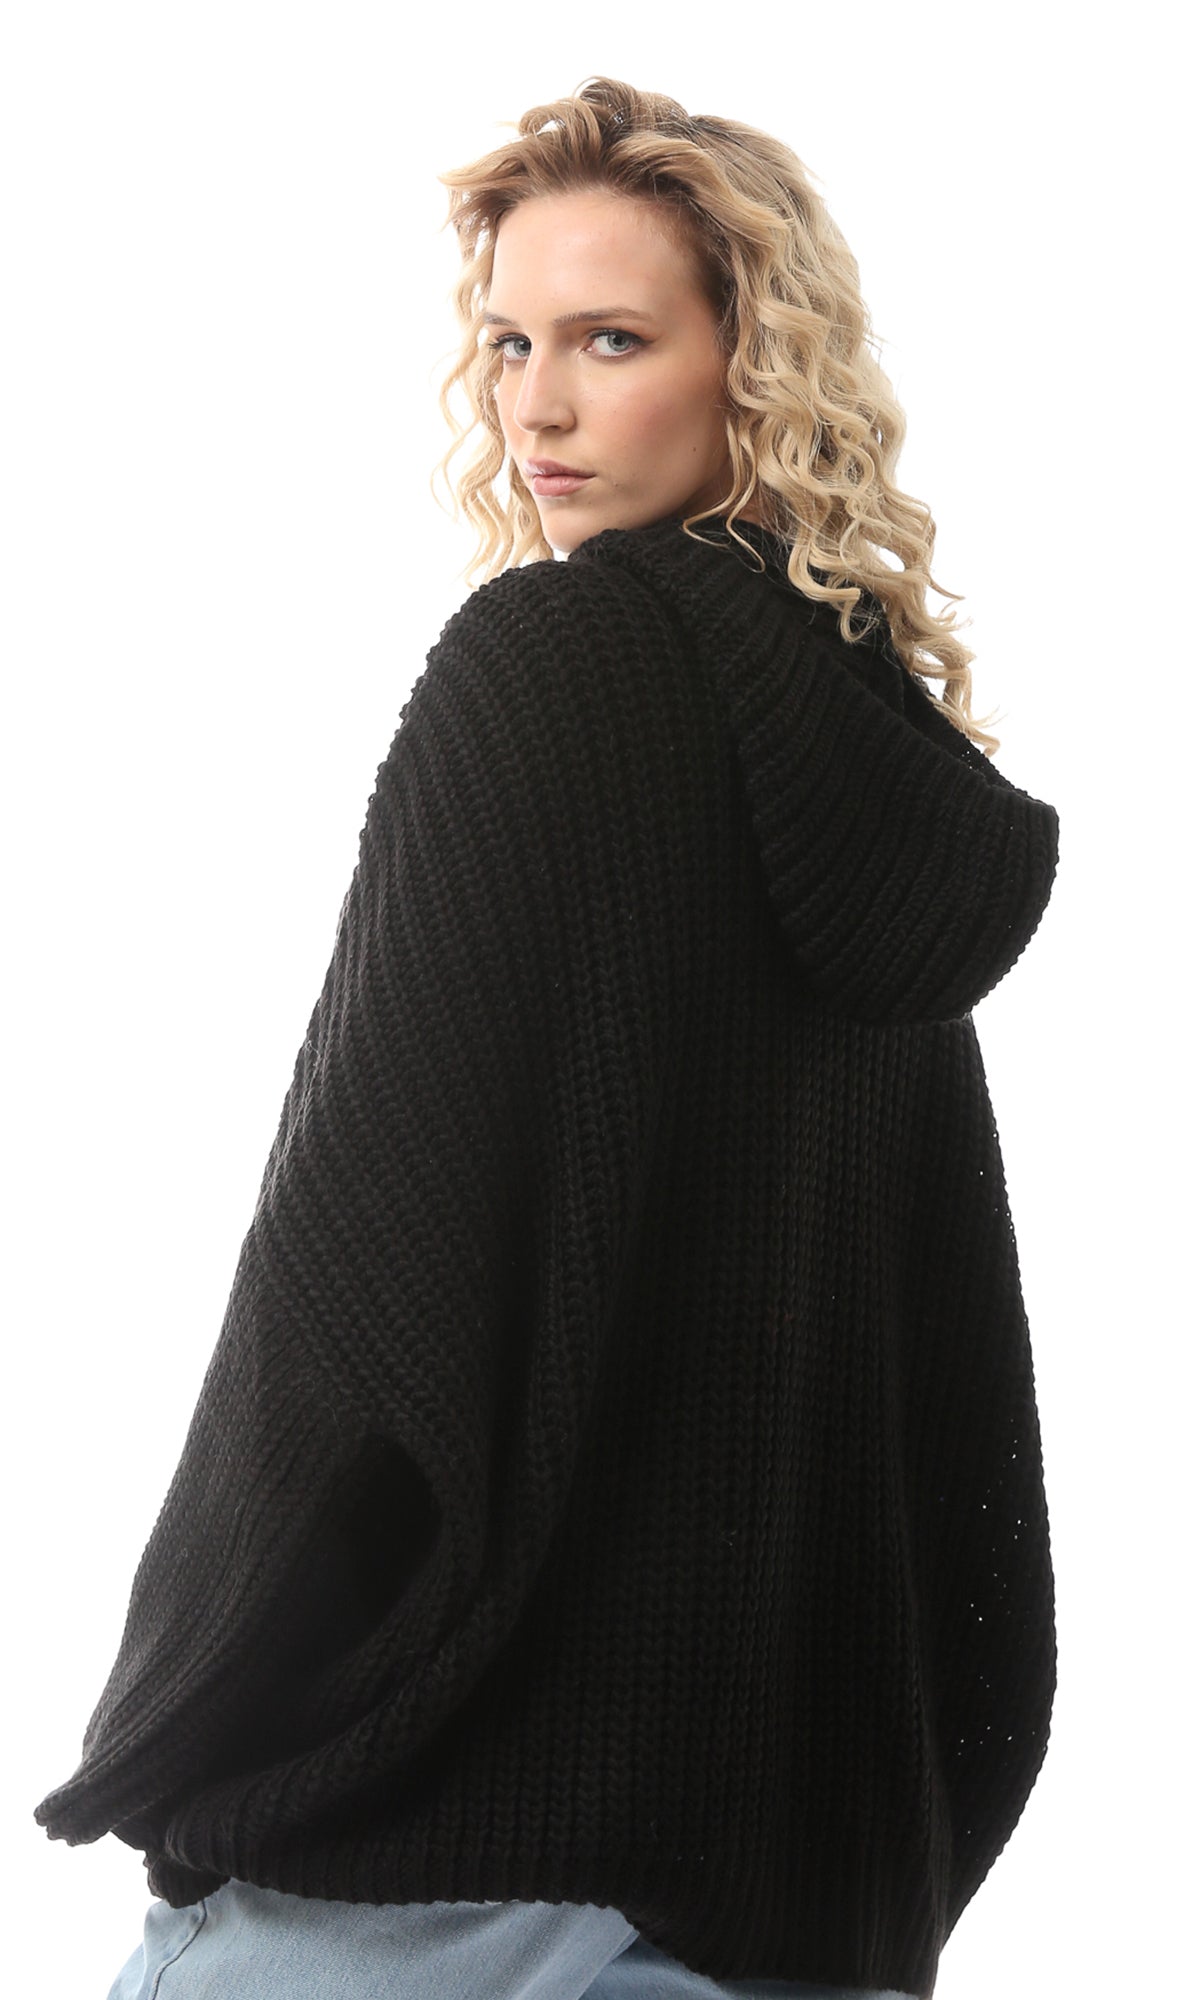 O168906 Knitted Long Black Acrylic Pullover